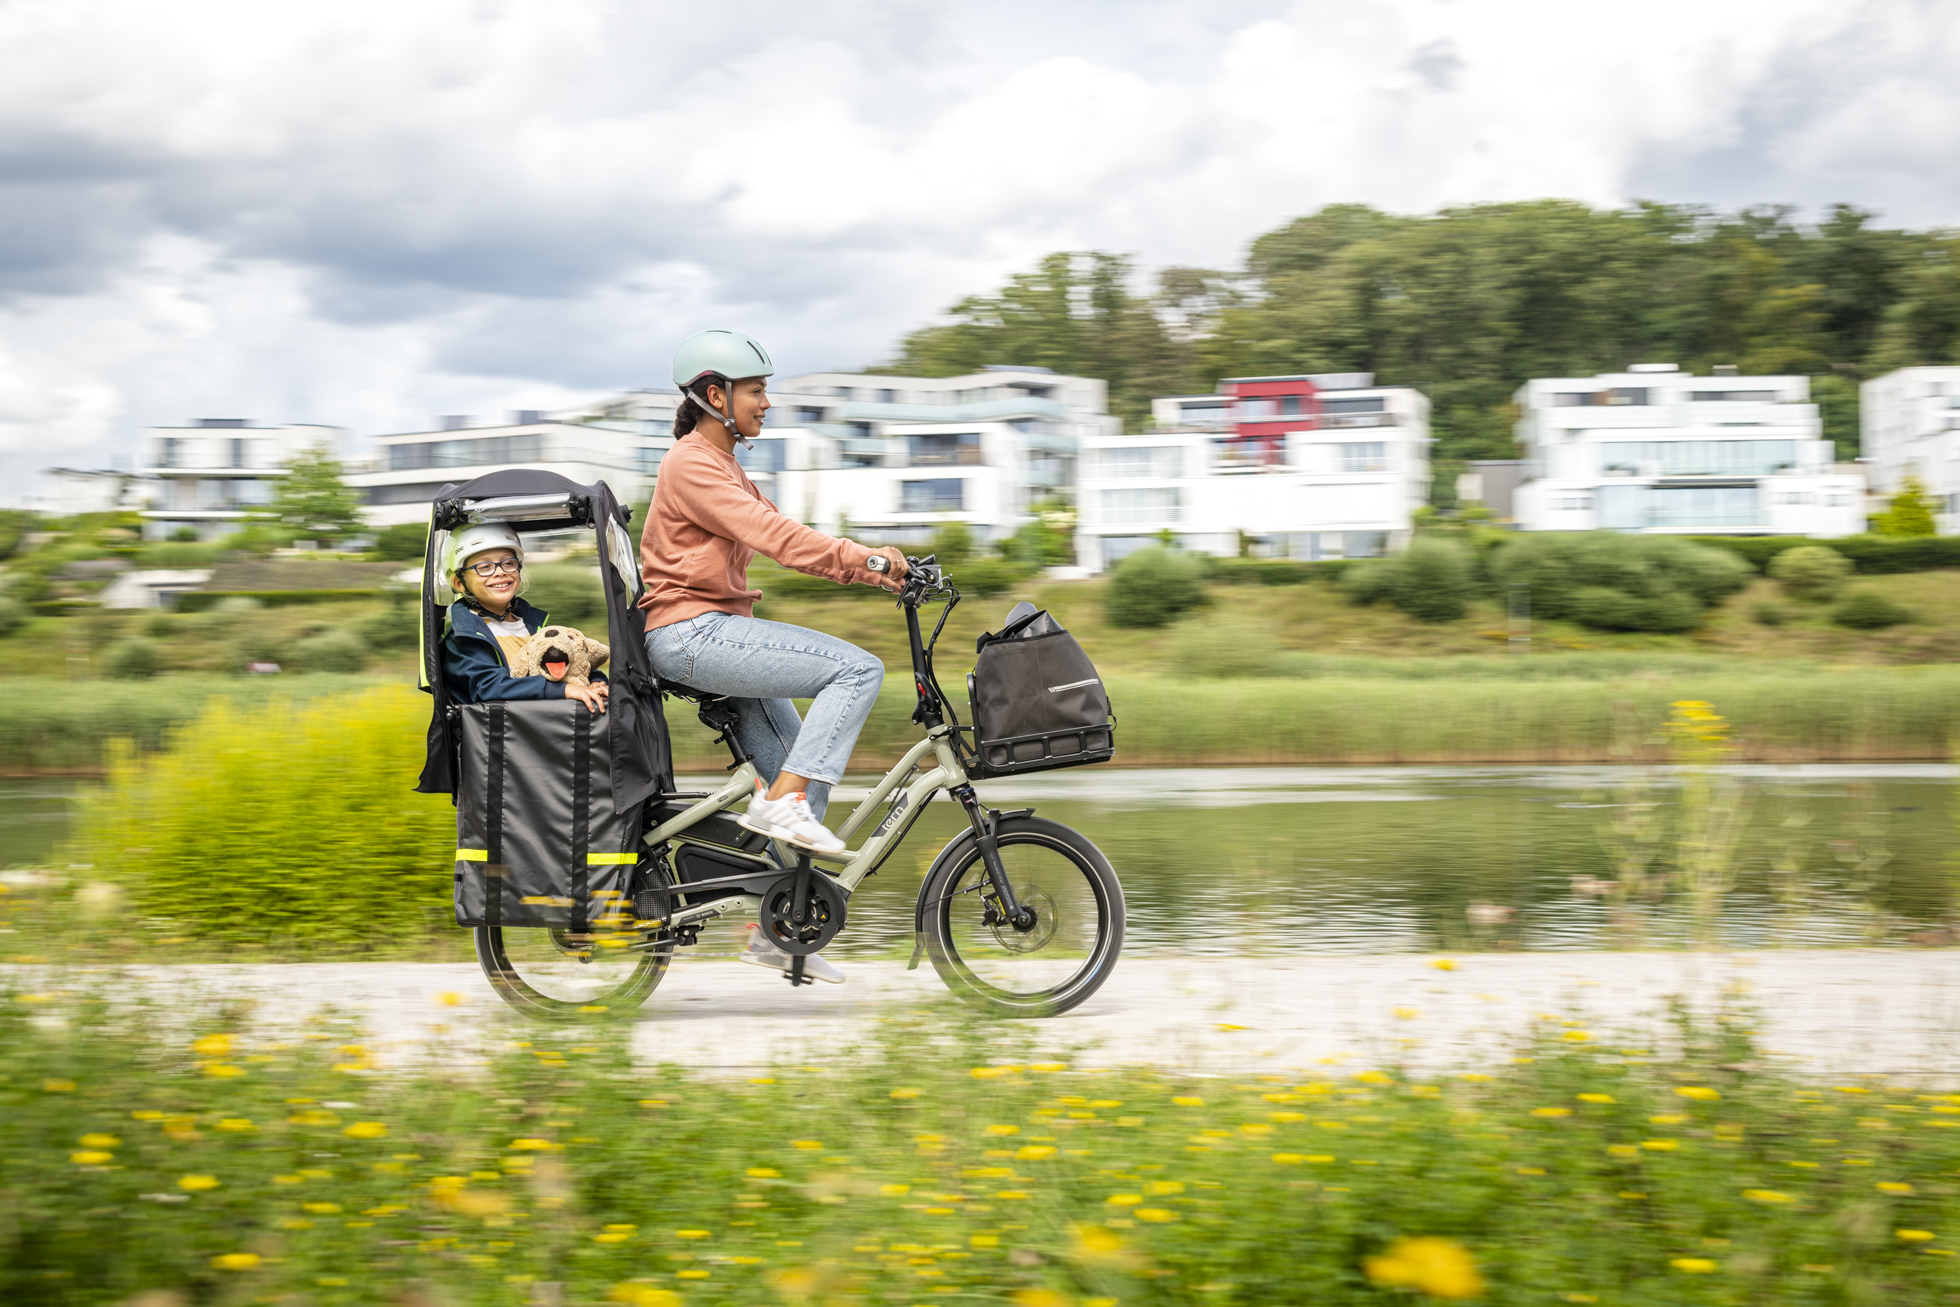 Tern Launches New Modular Accessories For Family Biking